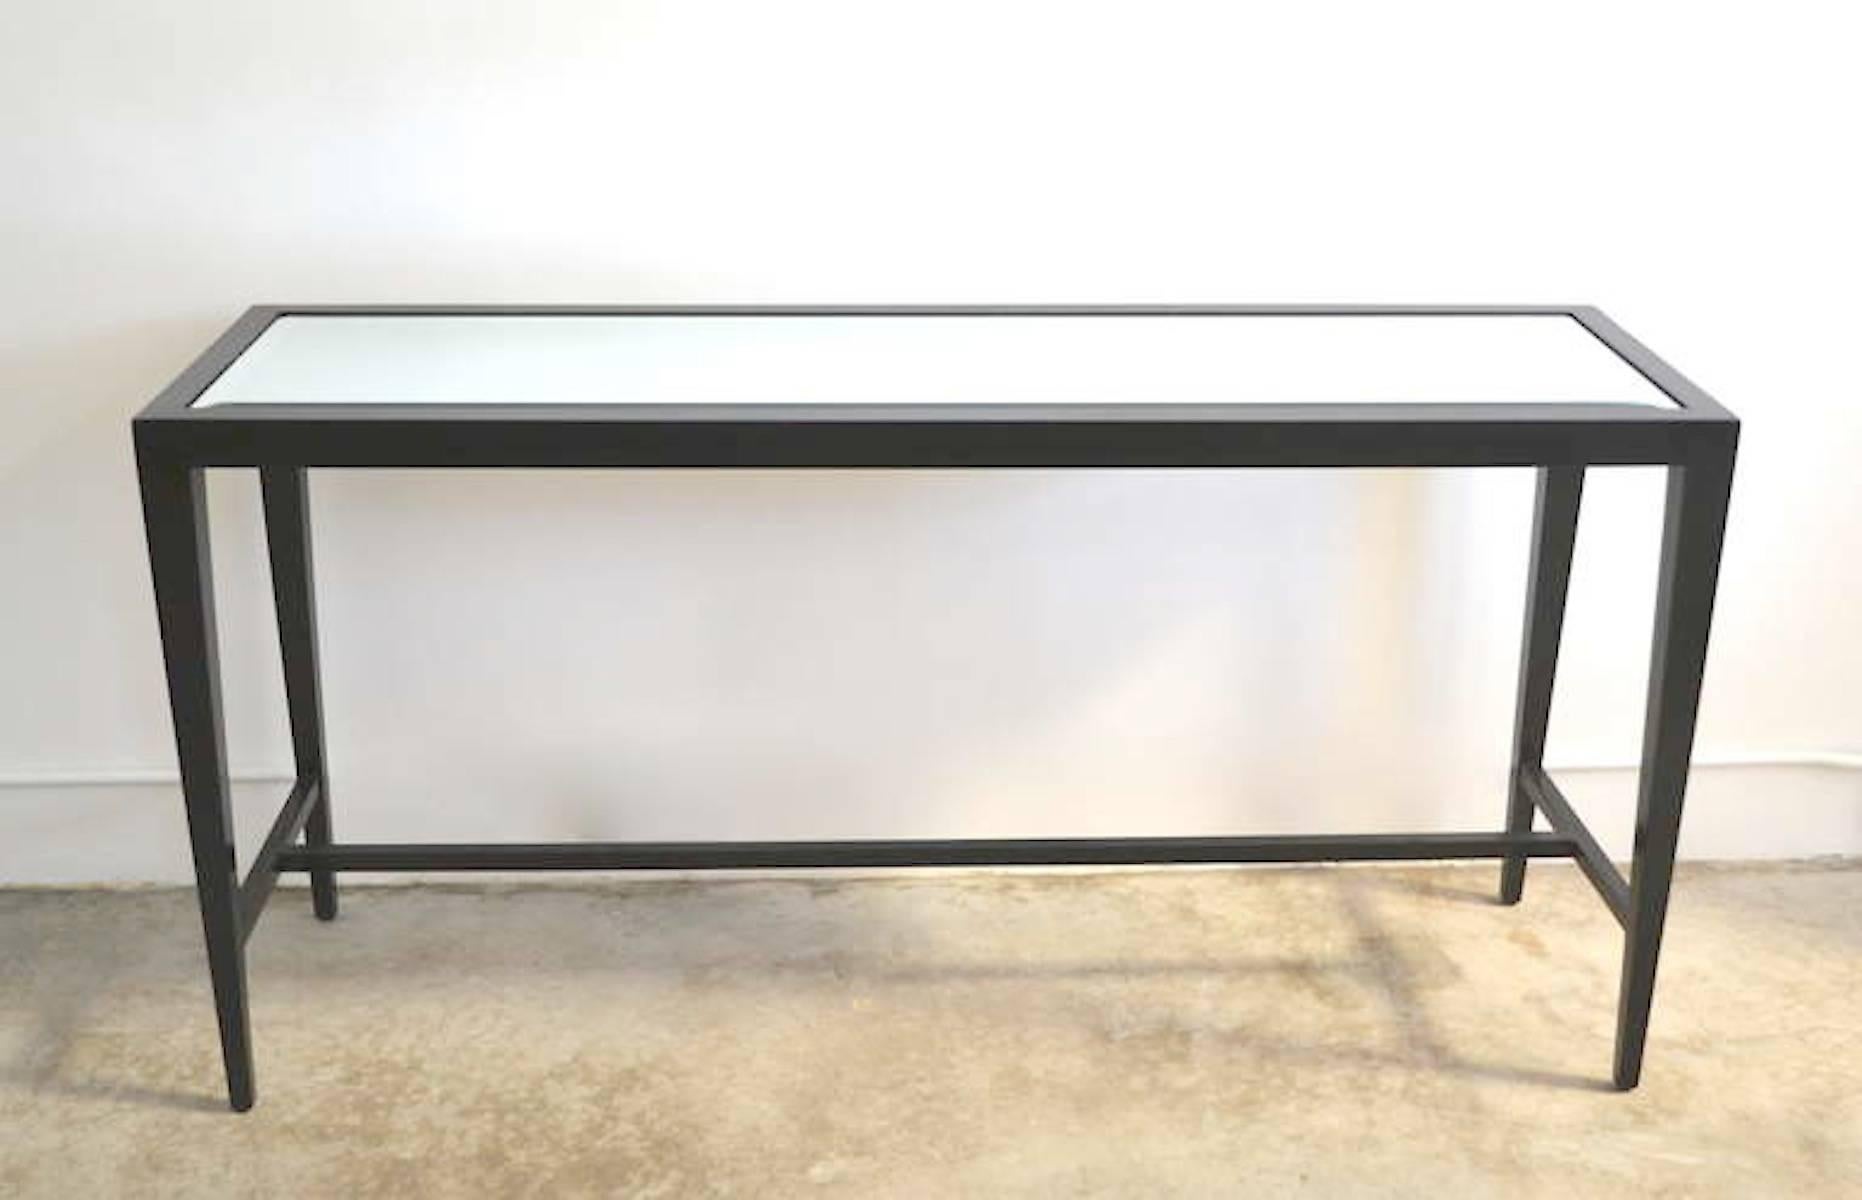 Stunning midcentury console table, circa 1950s-1960s. This striking, highly decorative sofa table is designed with an inset beveled mirror top and a polished black lacquered finish over its hardwood frame. The tapered design of the legs creates a